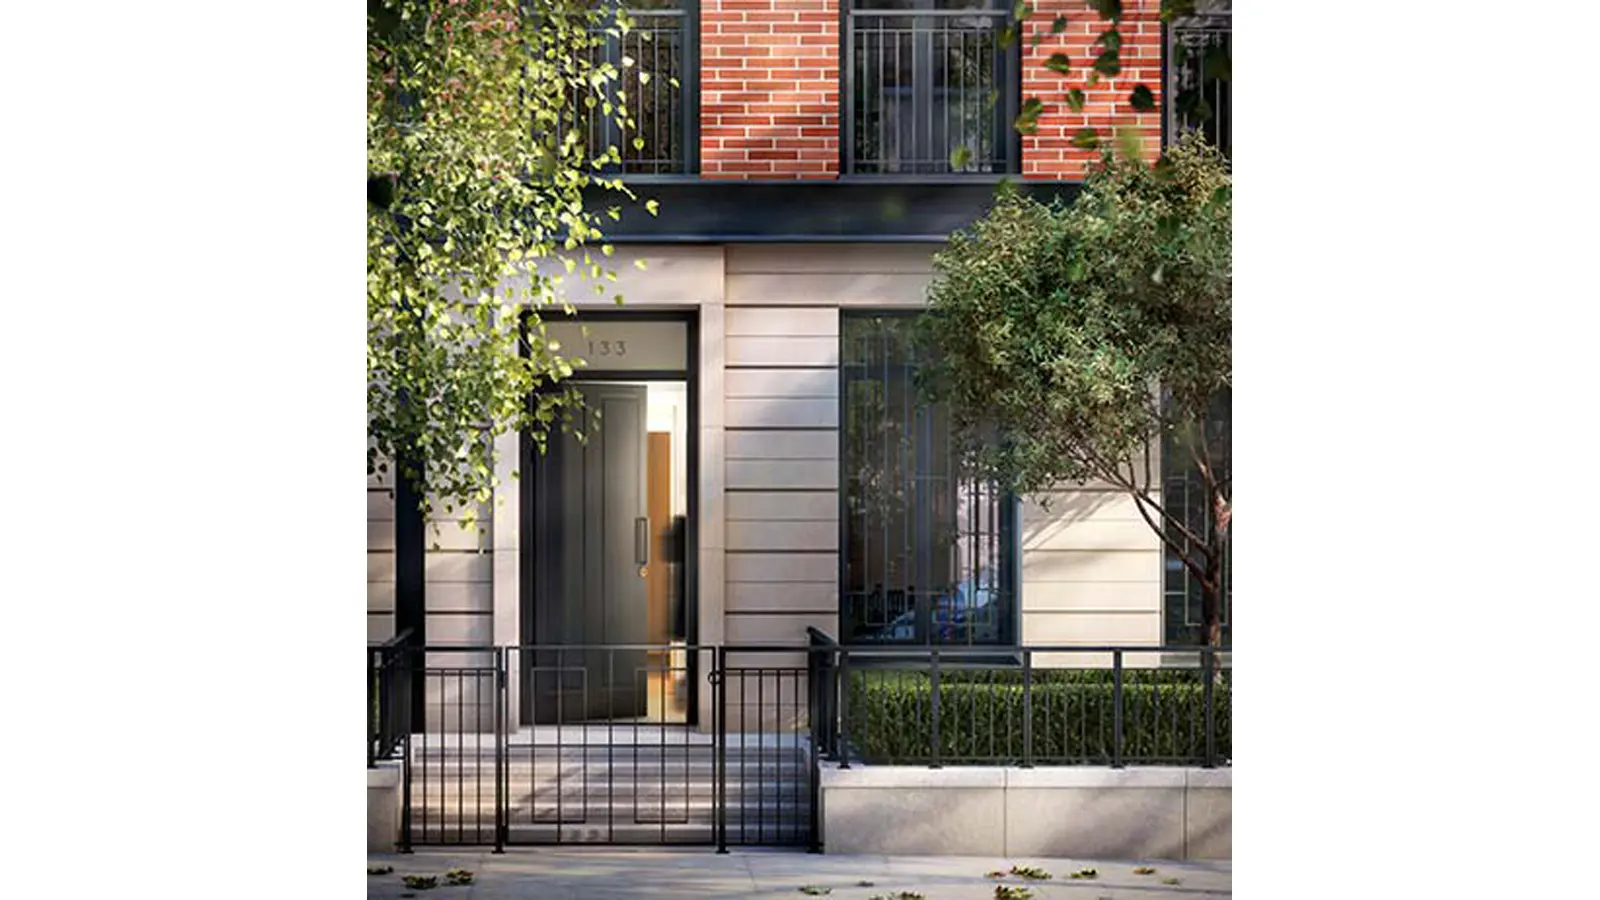 The Greenwich Lane Townhouses, 133 West 11th Street